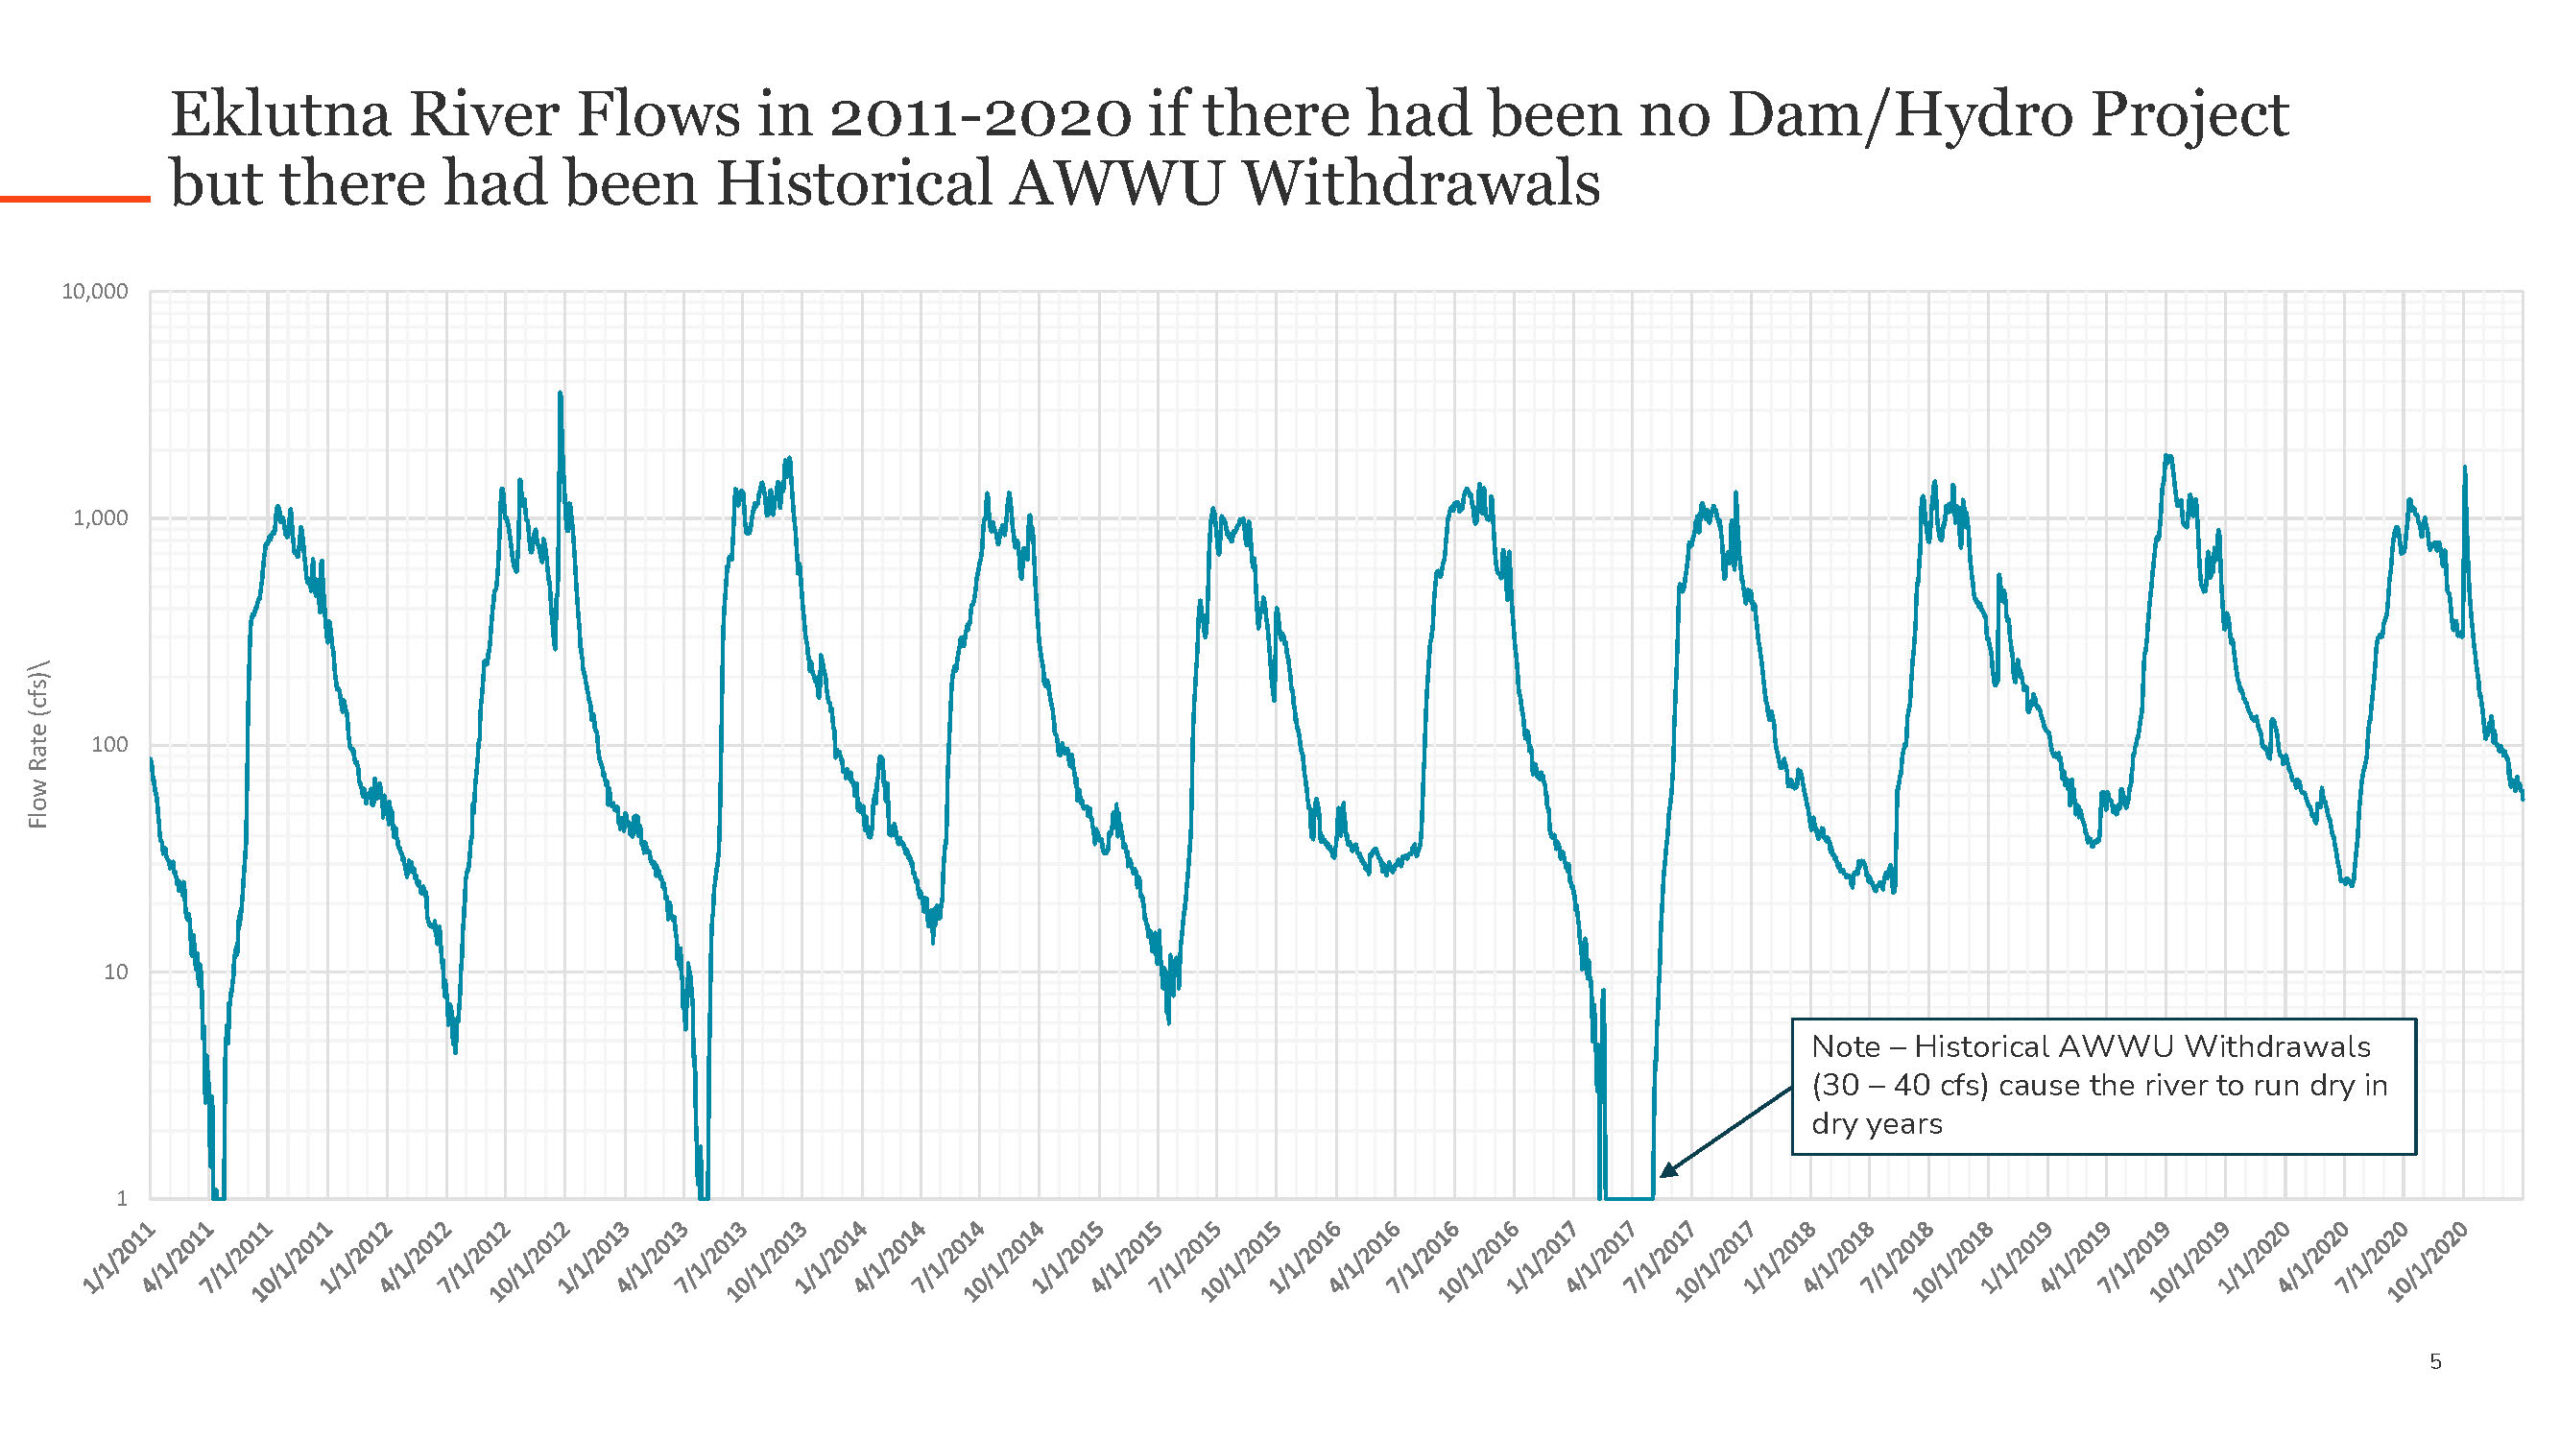 A graph estimating Eklutna River flow rates if there were no dam